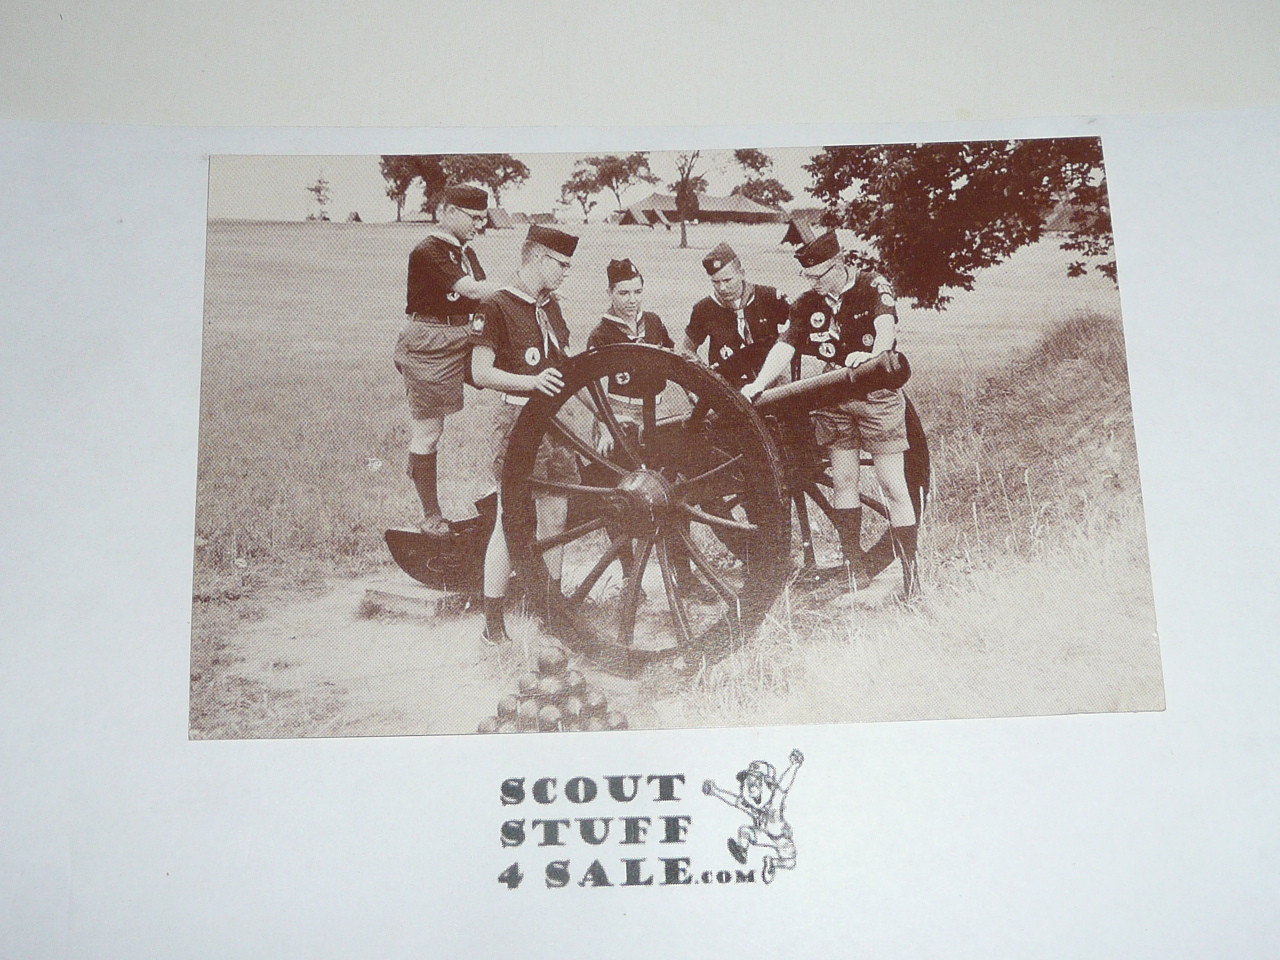 1957 National Jamboree Post Card of Cradle of Scouts at a Cannon